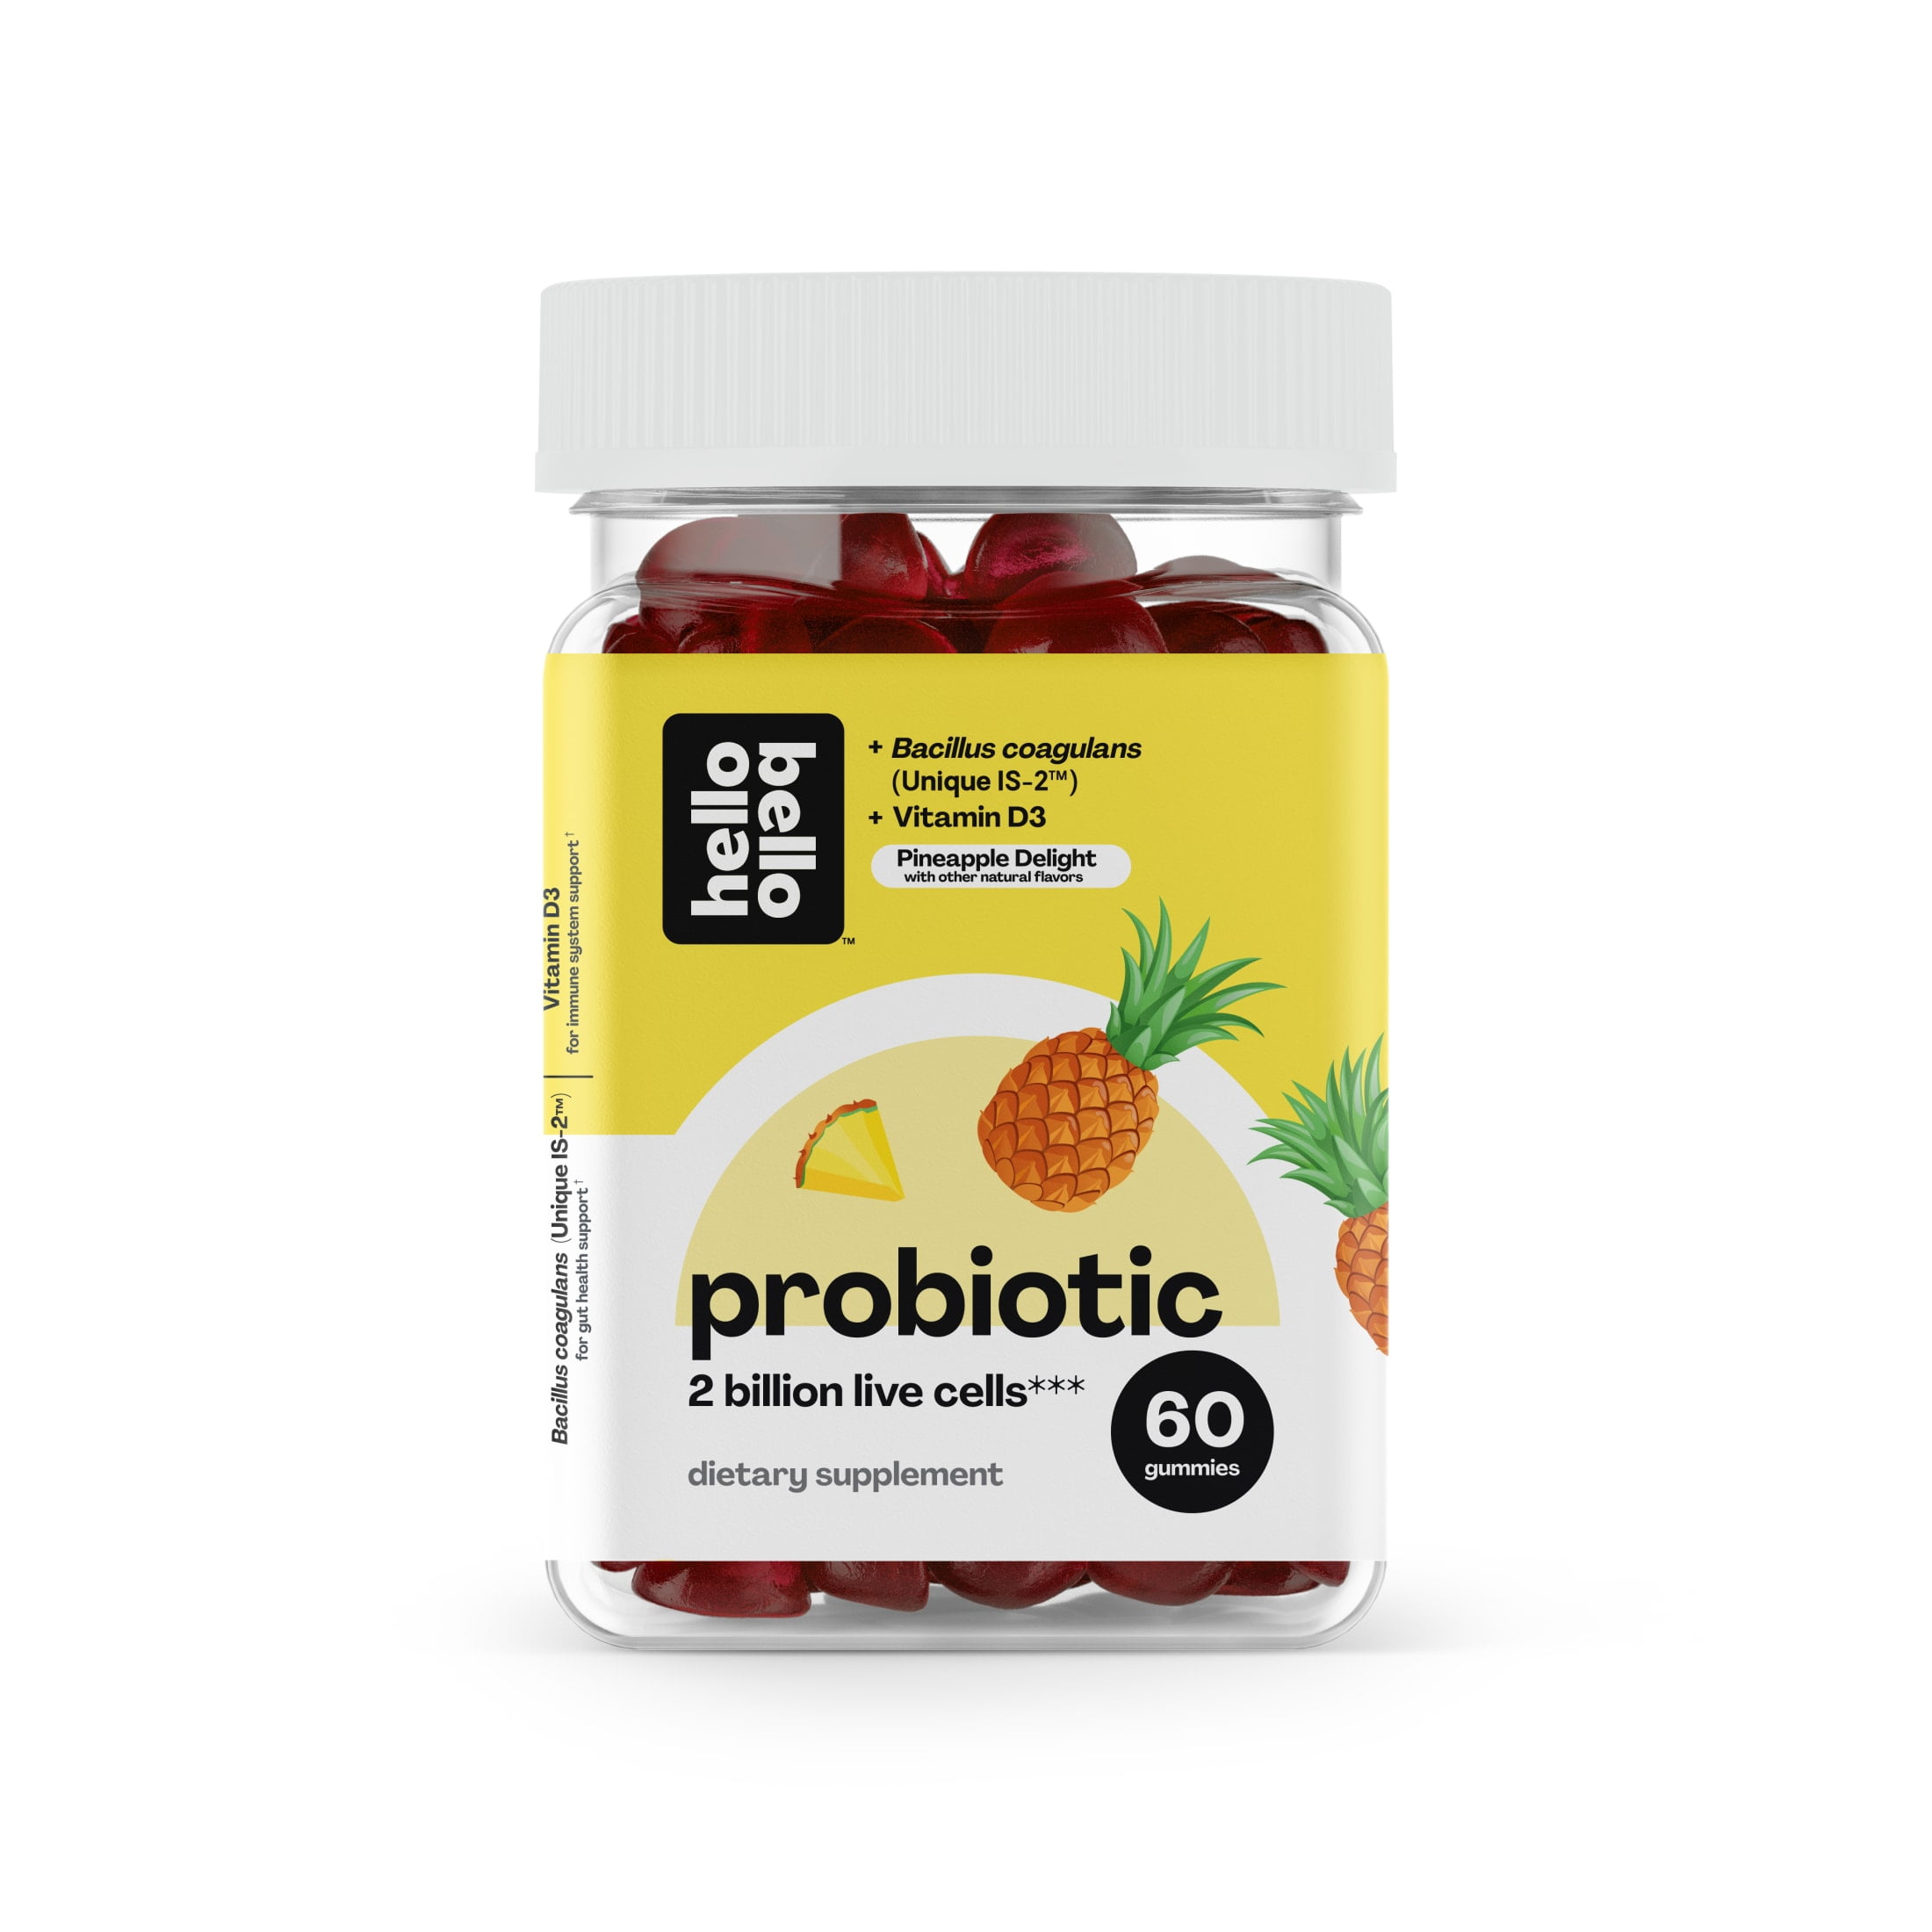 Hello Bello Probiotics I Vegan and nonGMO Natural Pineapple Flavor Gummies I Made with 2 Billion Live Cells and Vitamin D3 for Optimum Gut Health I 60 Count